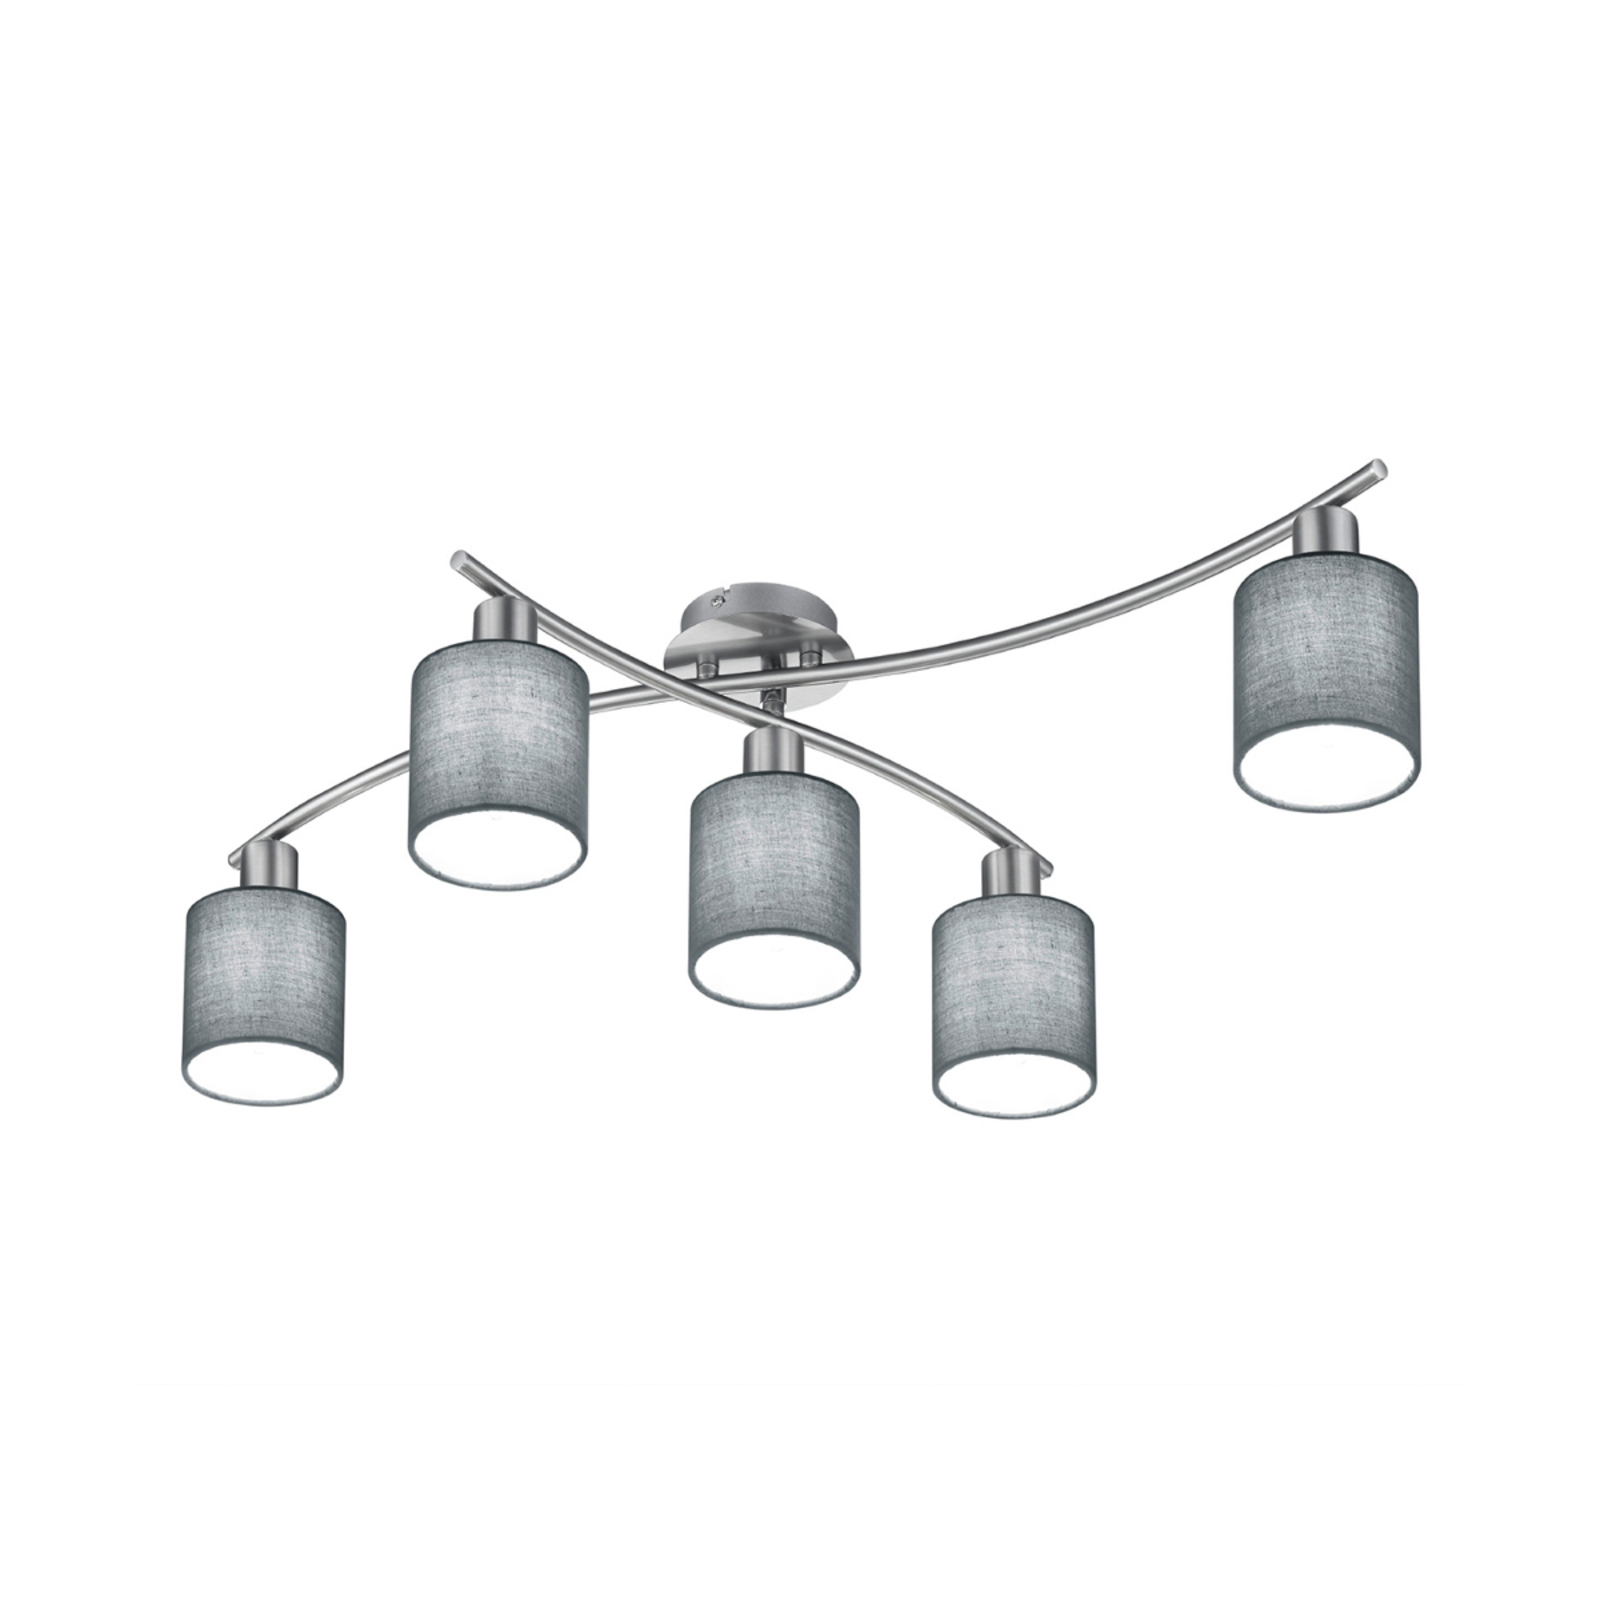 Ceiling light Garda Five-bulb with grey lampshades